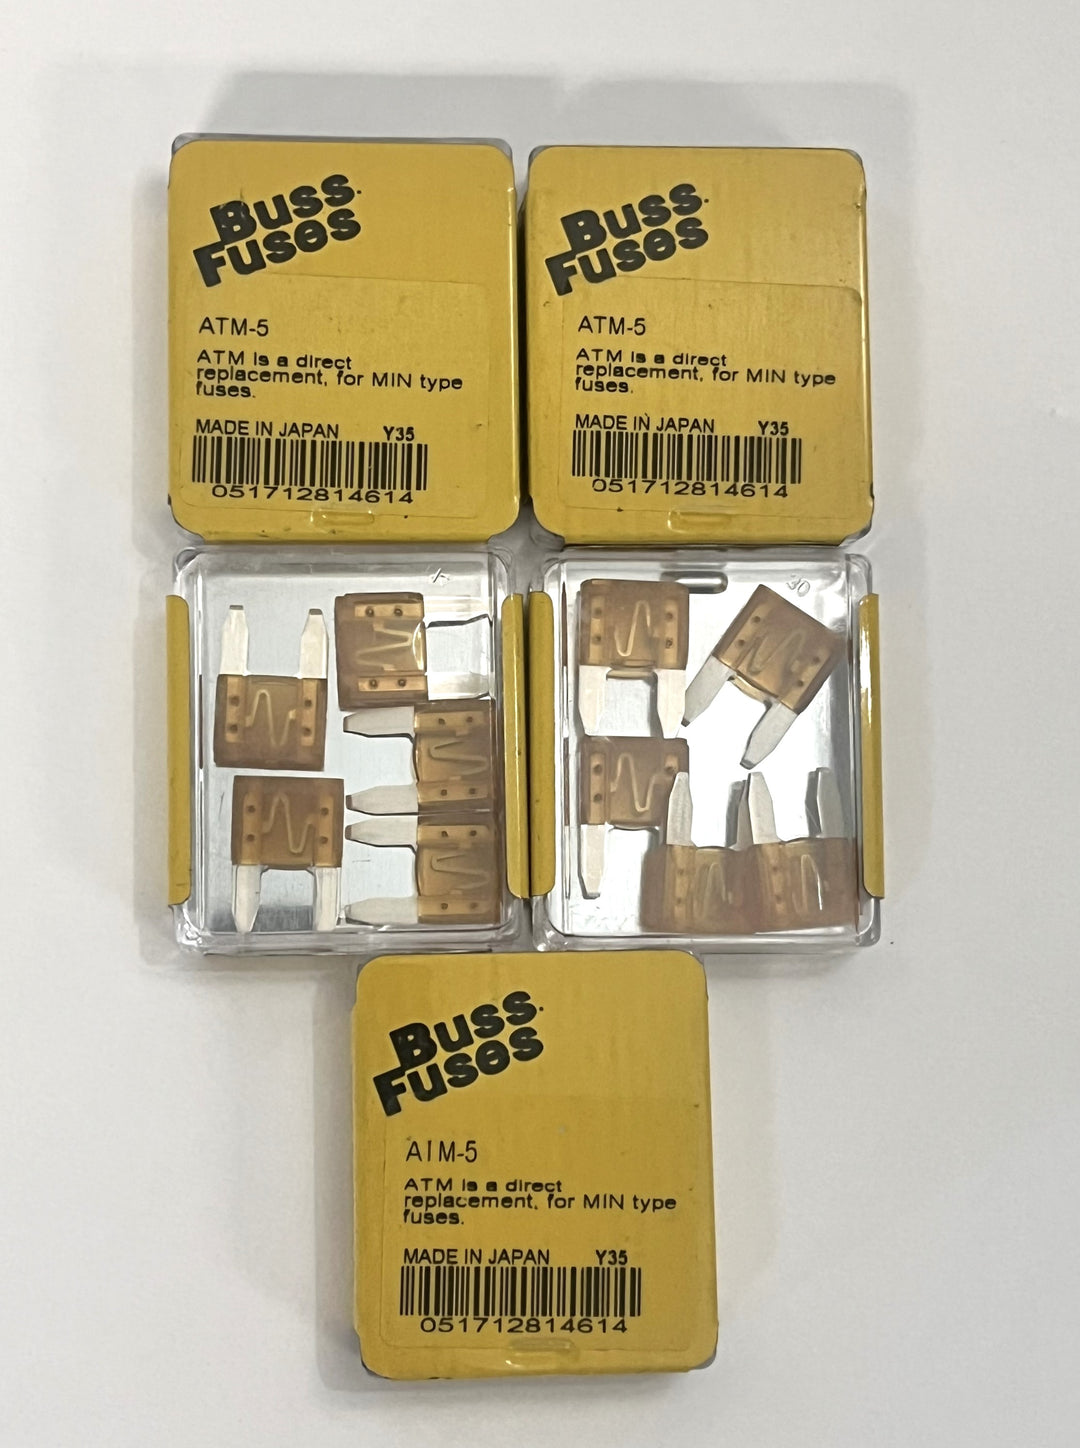 Buss Fuses ATM-5 Automotive Blade Fuse (Tin) 25-Pack. Reliable 5 Amp protection for vehicles. Perfect for replacing blown fuses.